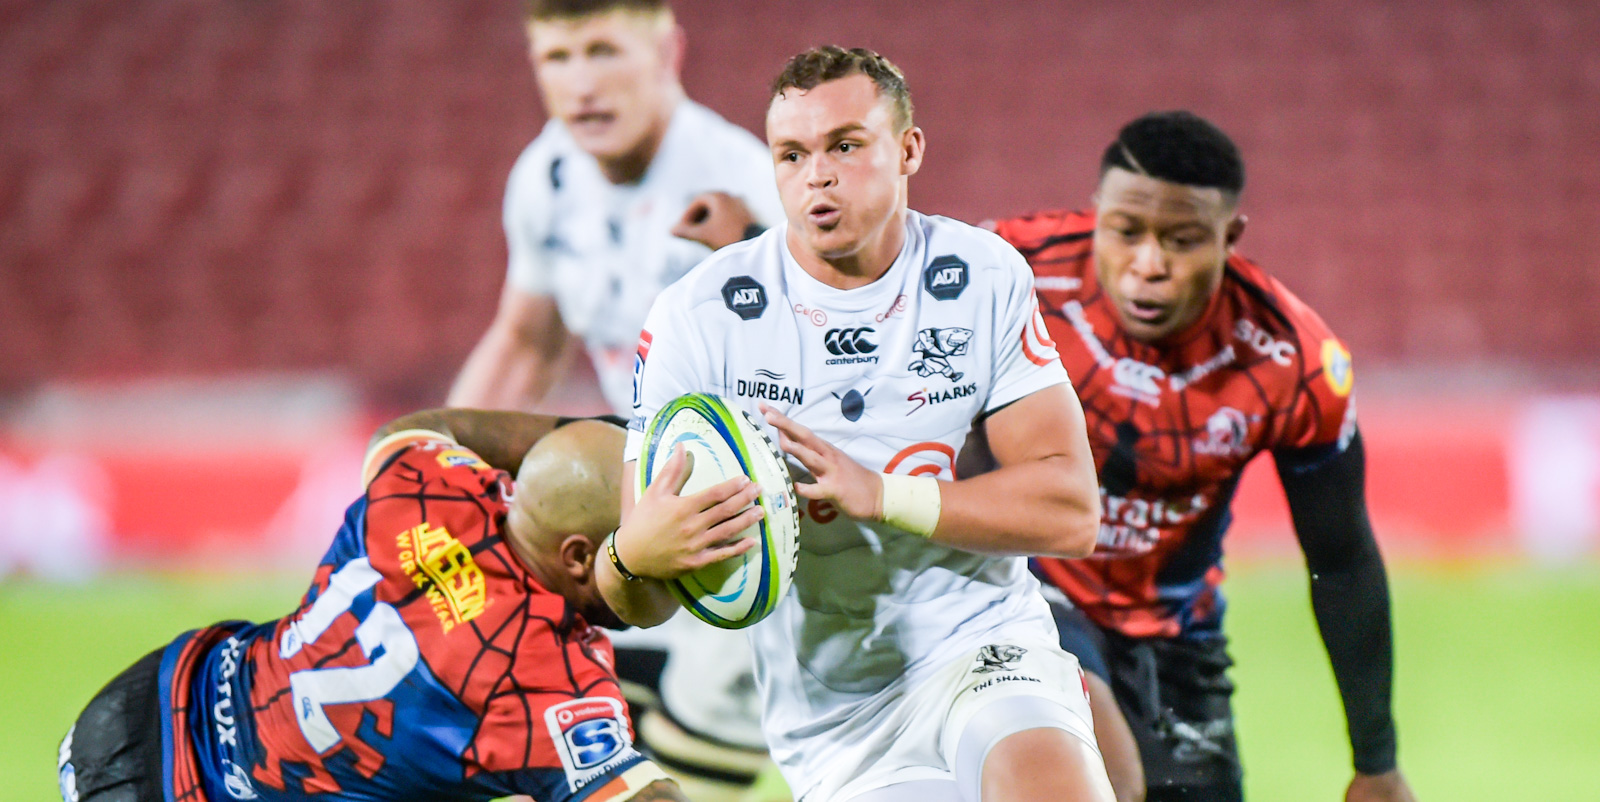 Curwin Bosch in action for the Cell C Sharks.